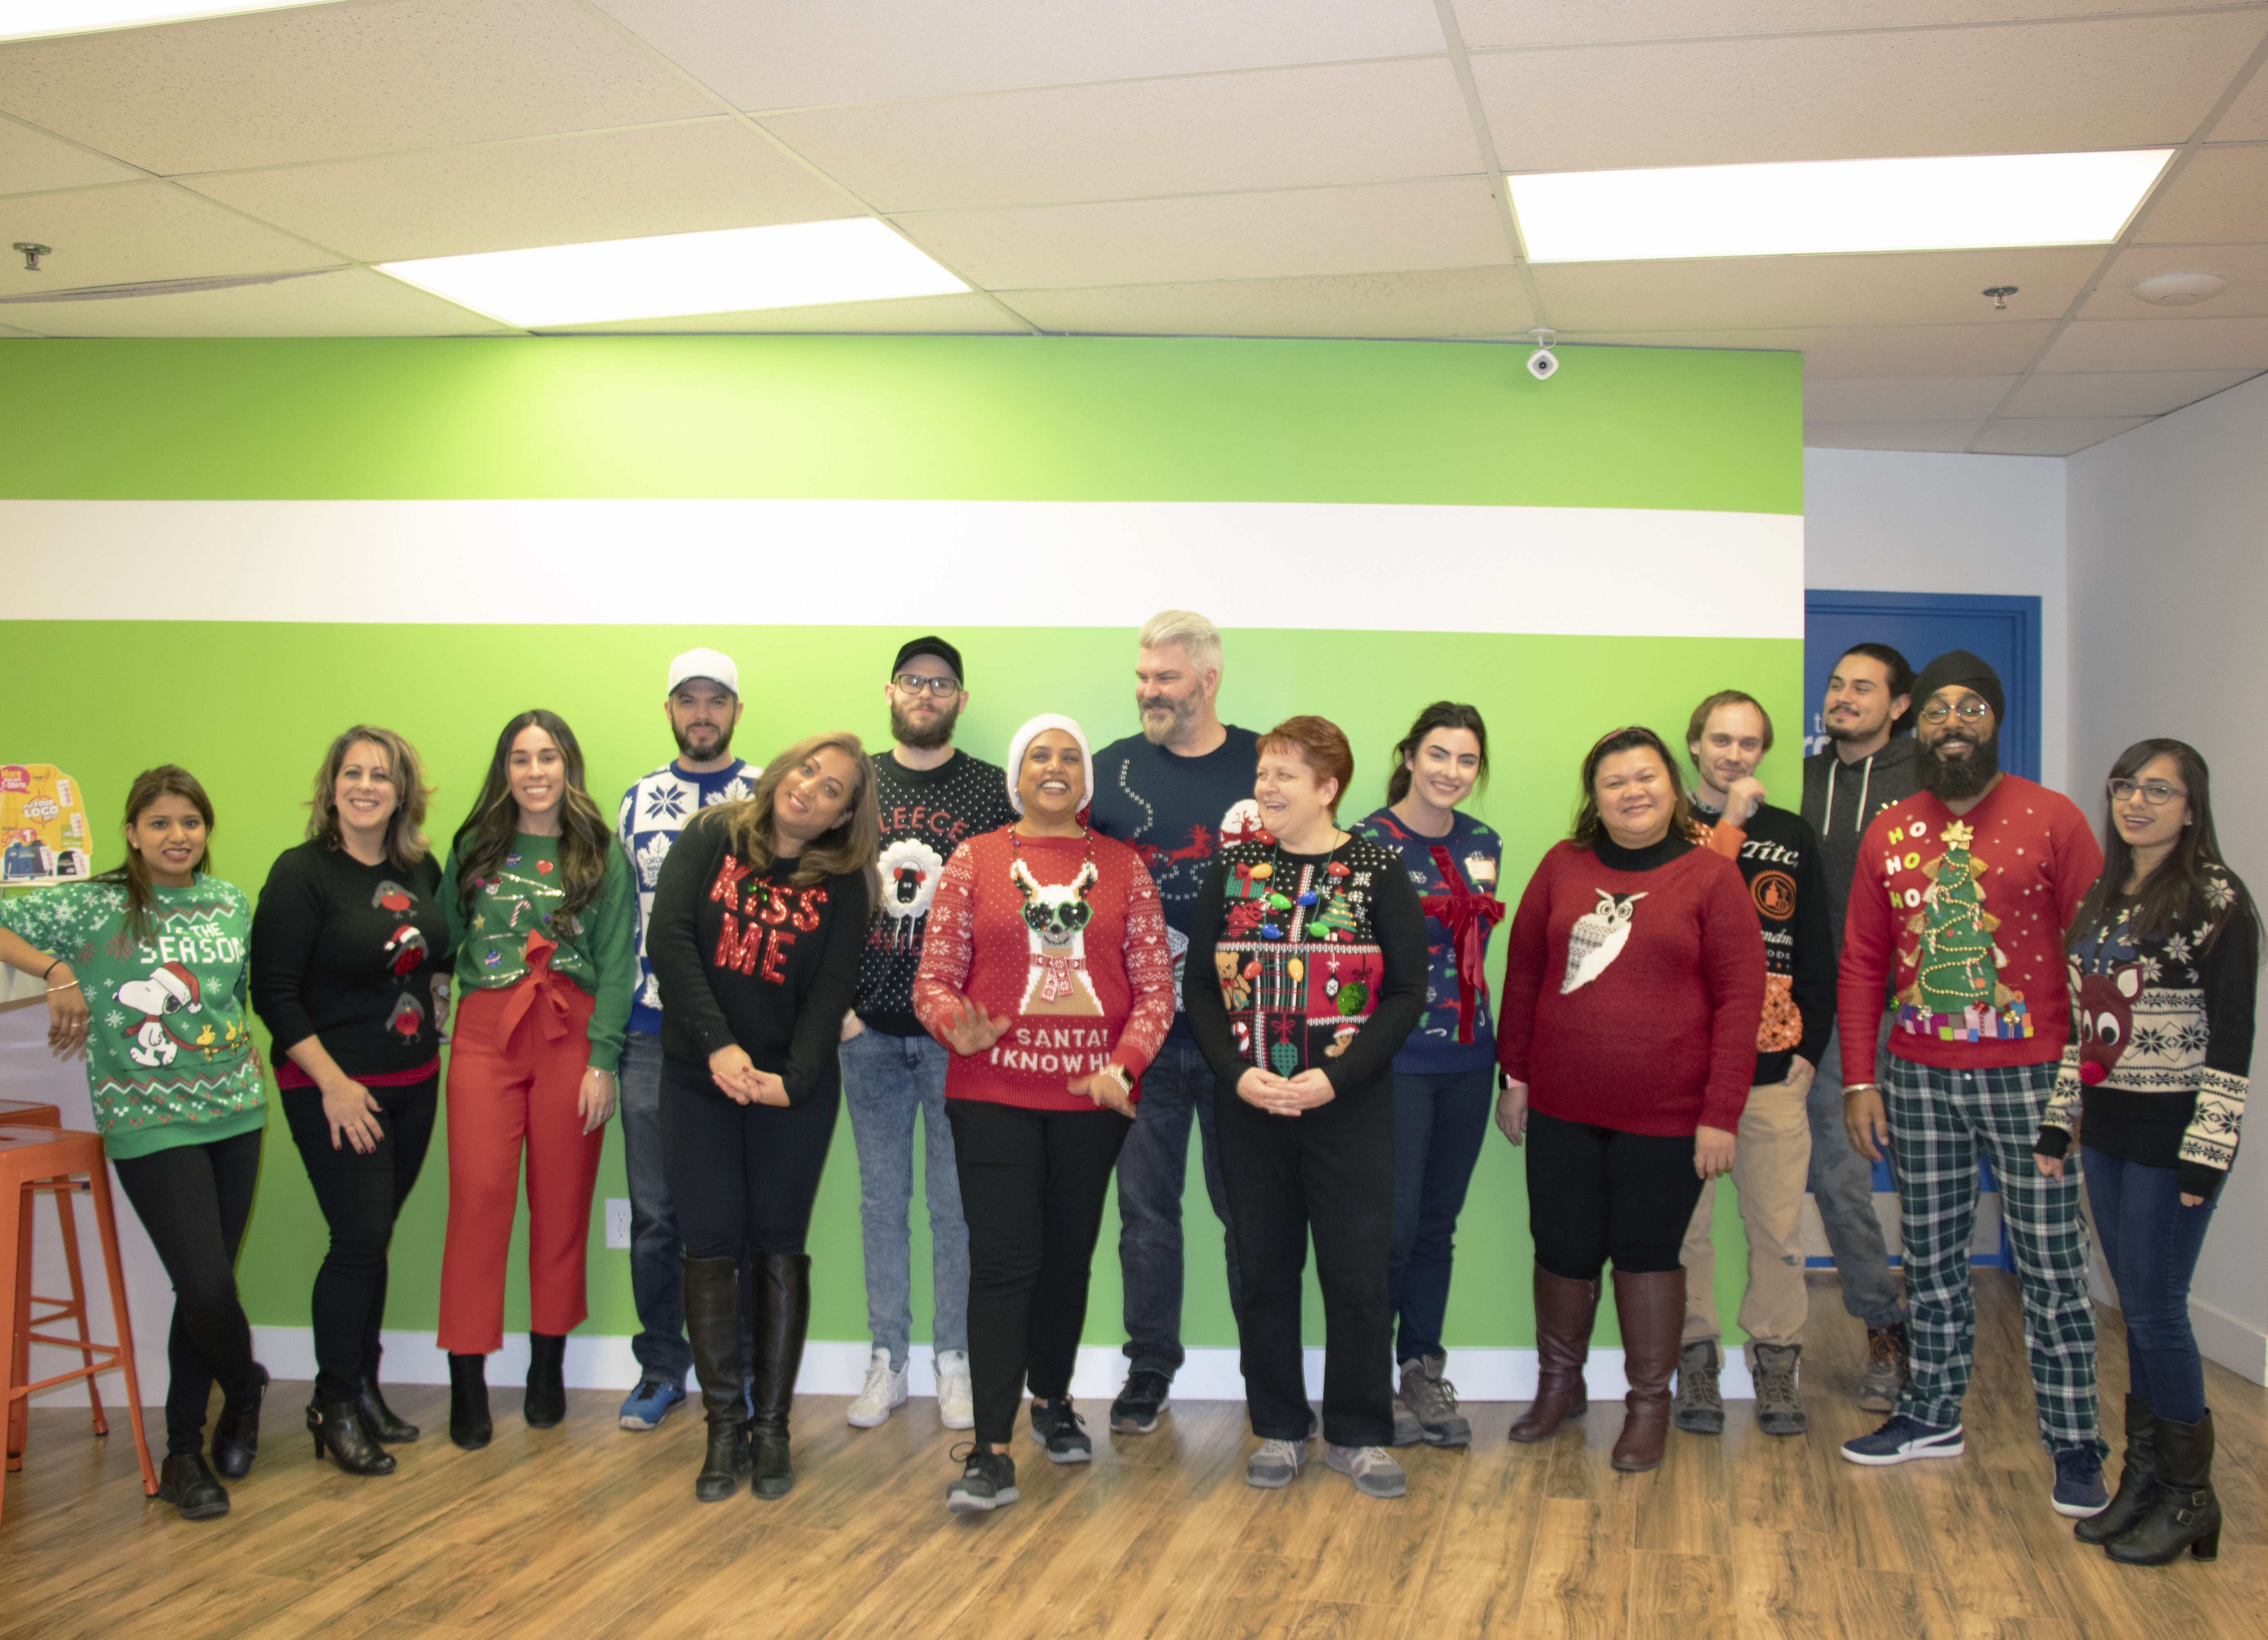 Employees wearing christmas sweaters for the ugly sweater contest.